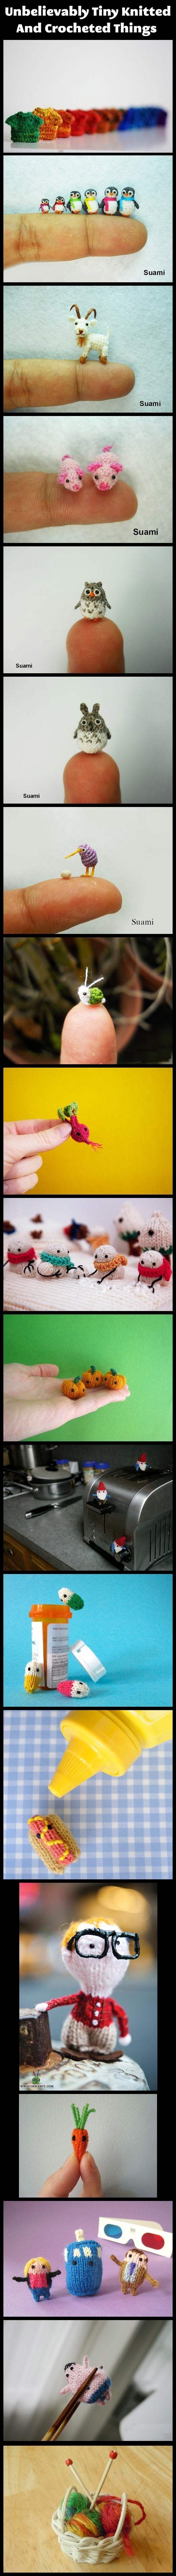 Unbelievably tiny knitted and crocheted things.